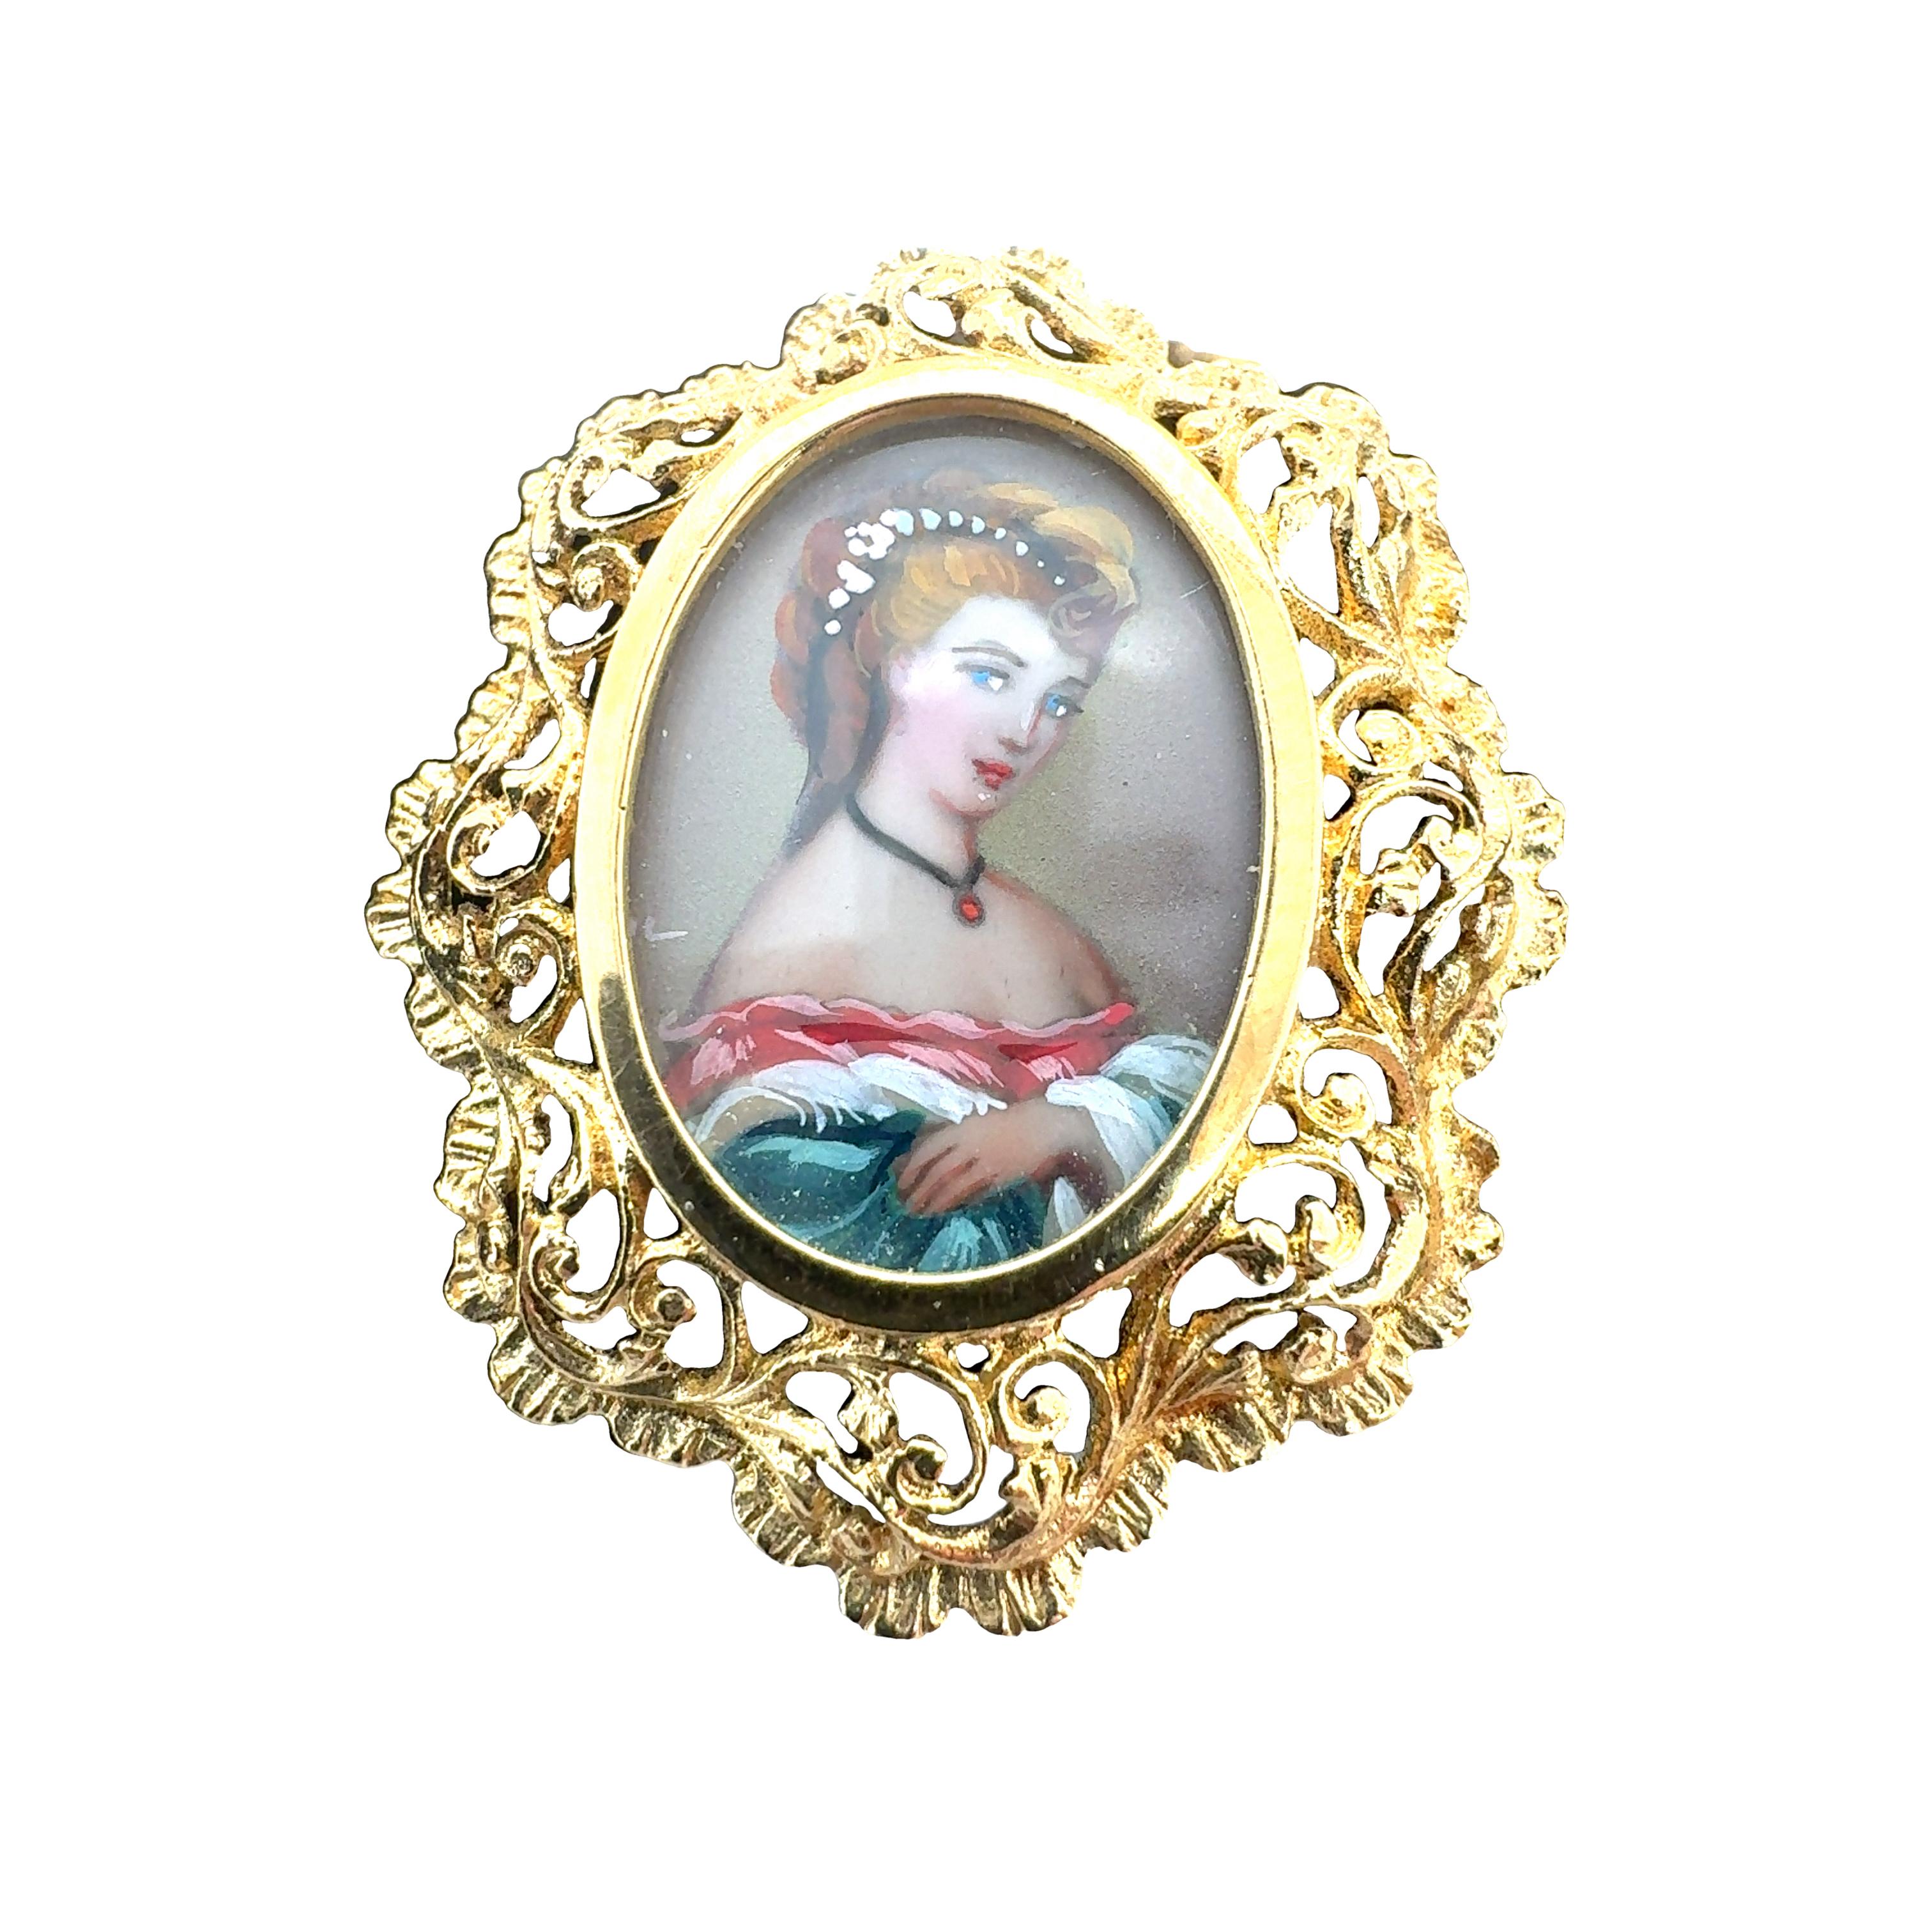 One Victorian 18K yellow gold and brown velvet choker centering an oval shaped slide pin featuring a portrait of a woman, a textured border and measuring 30 x 25 millimeters in size. Also features an 18K yellow gold buckle.

Metal: 18K Yellow